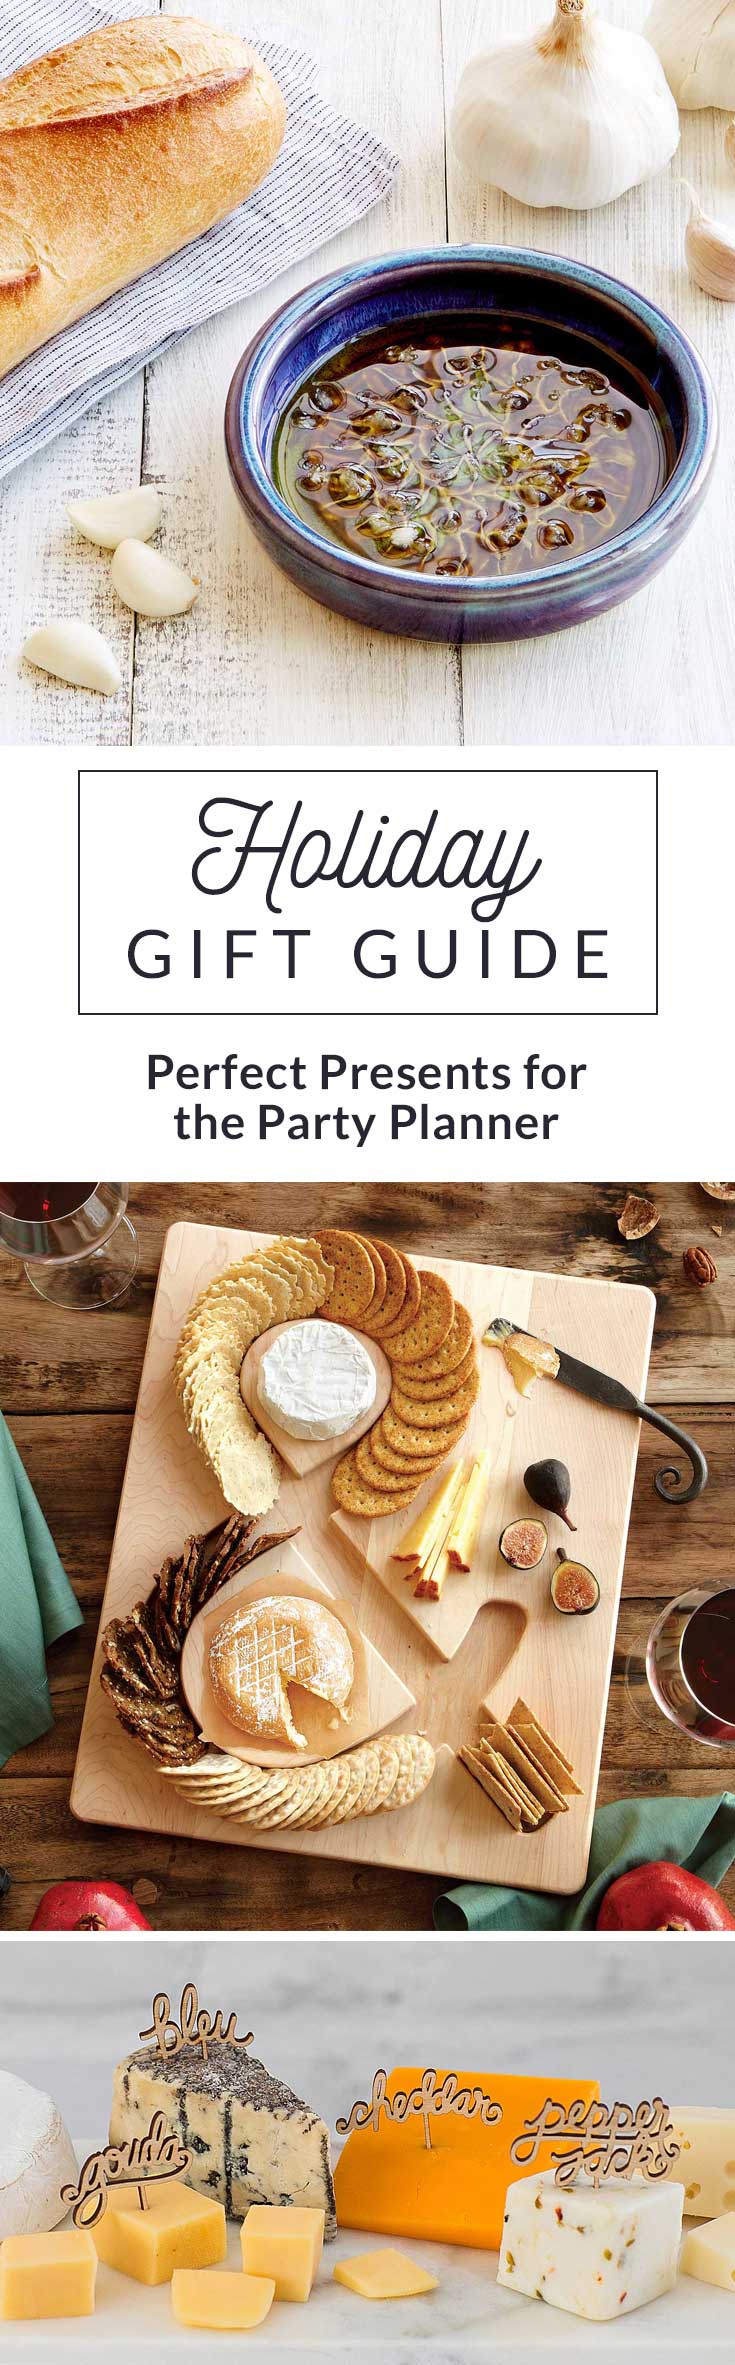 Picking the perfect present for a proud party planner isn't always, well, a party. These gift ideas are sure to make hosts and hostesses happy.